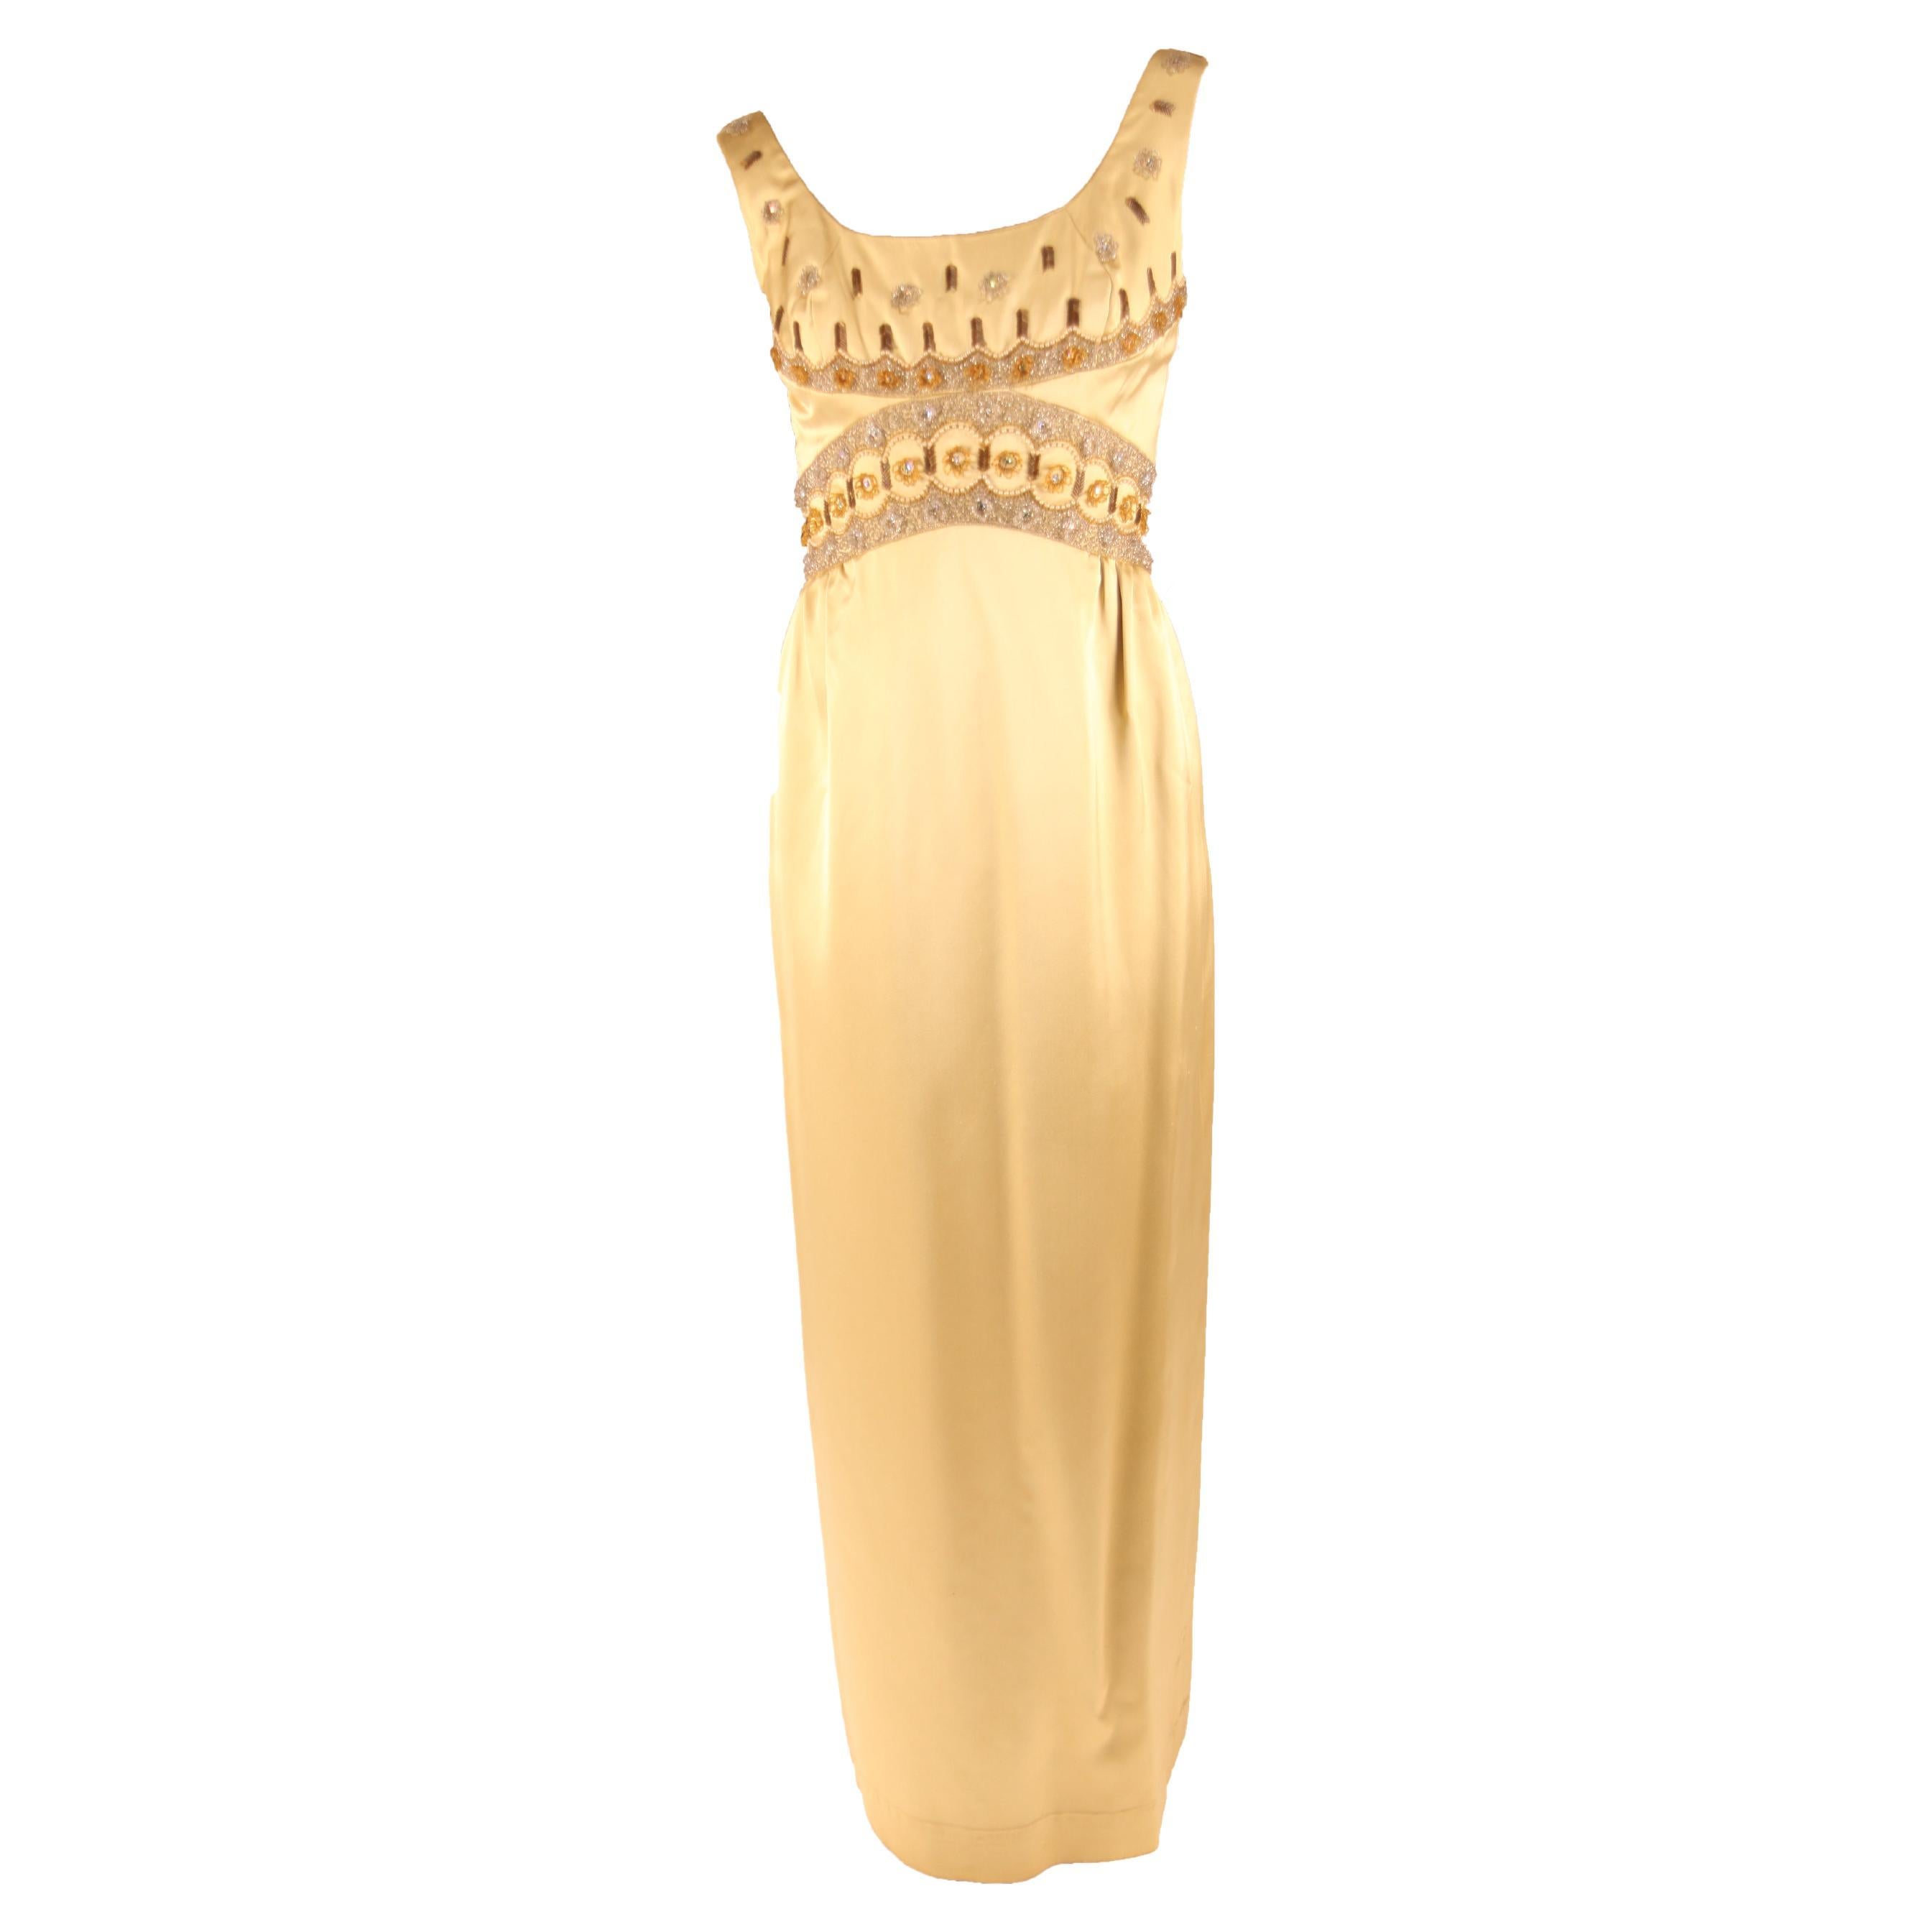 Jacques Heim couture gold silk satin evening gown, circa 1960s For Sale